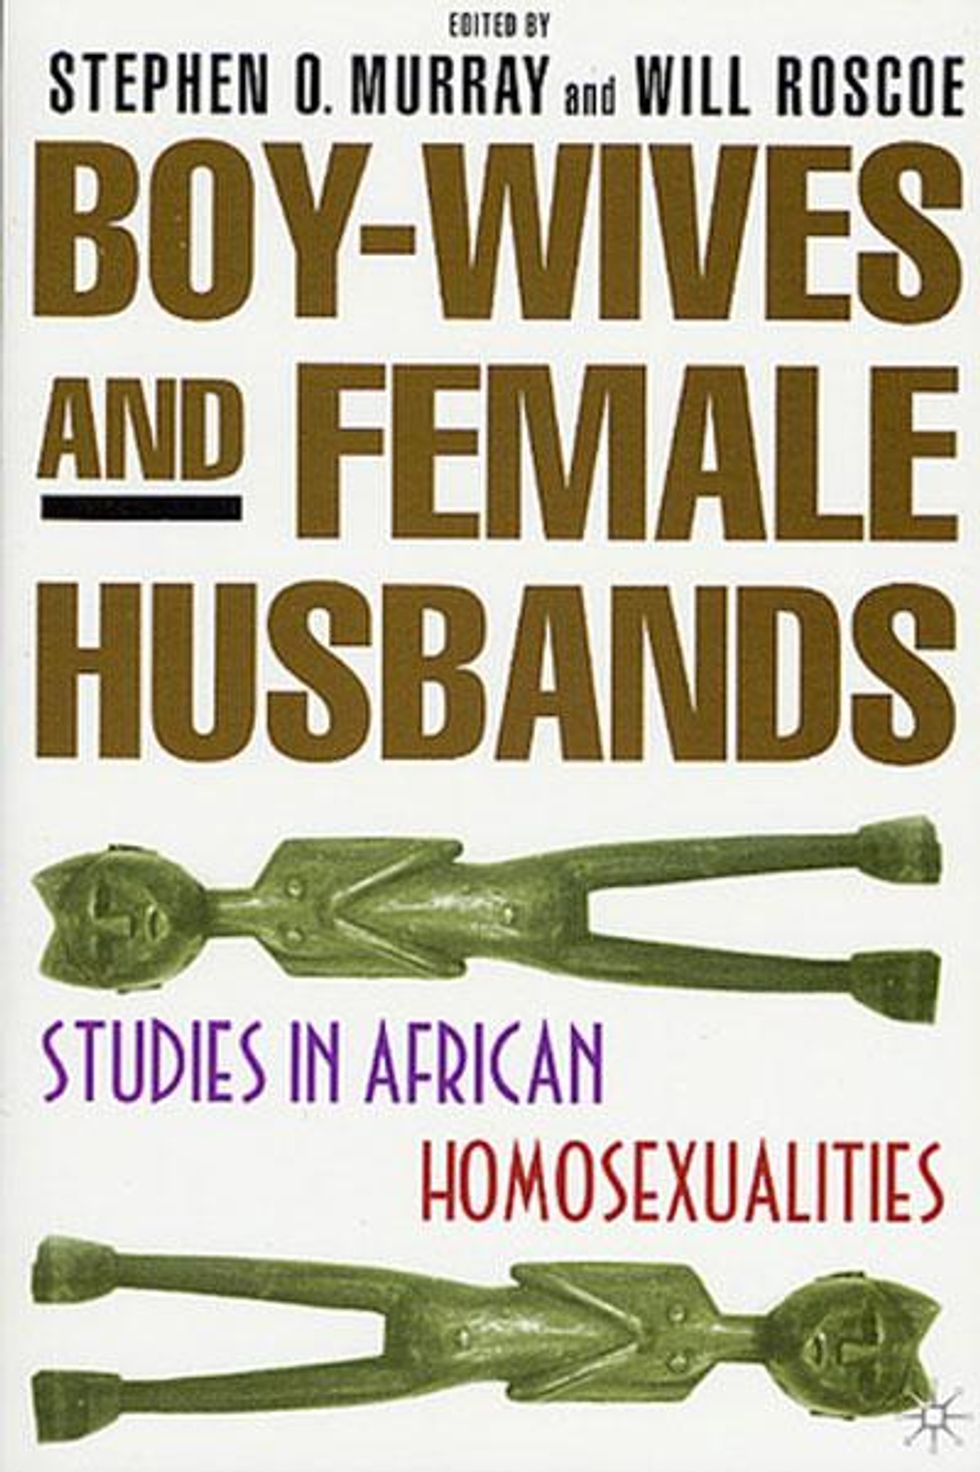 Types-of-african-homosexuality-x400d_0